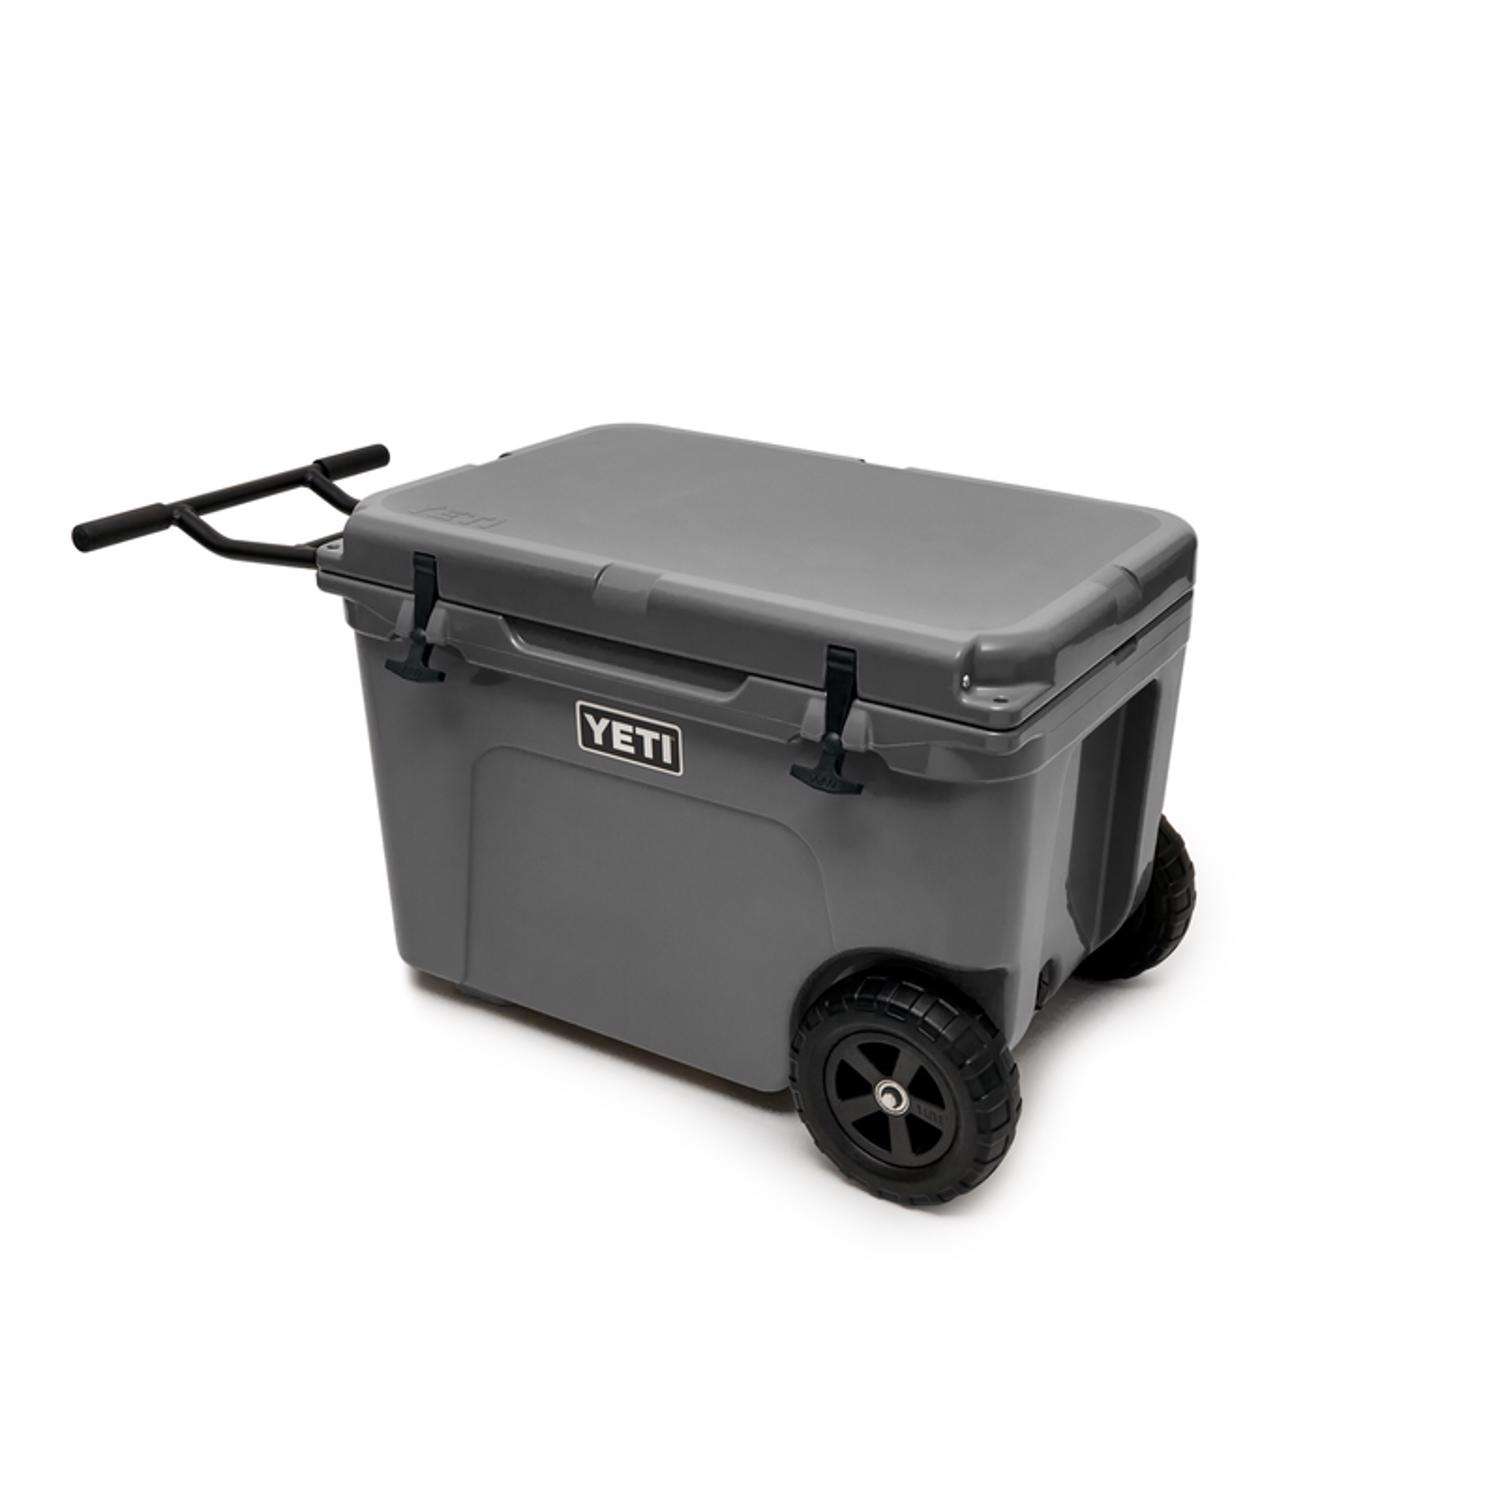 Yeti Just Slashed Prices on Coolers and Drinkware in Its First